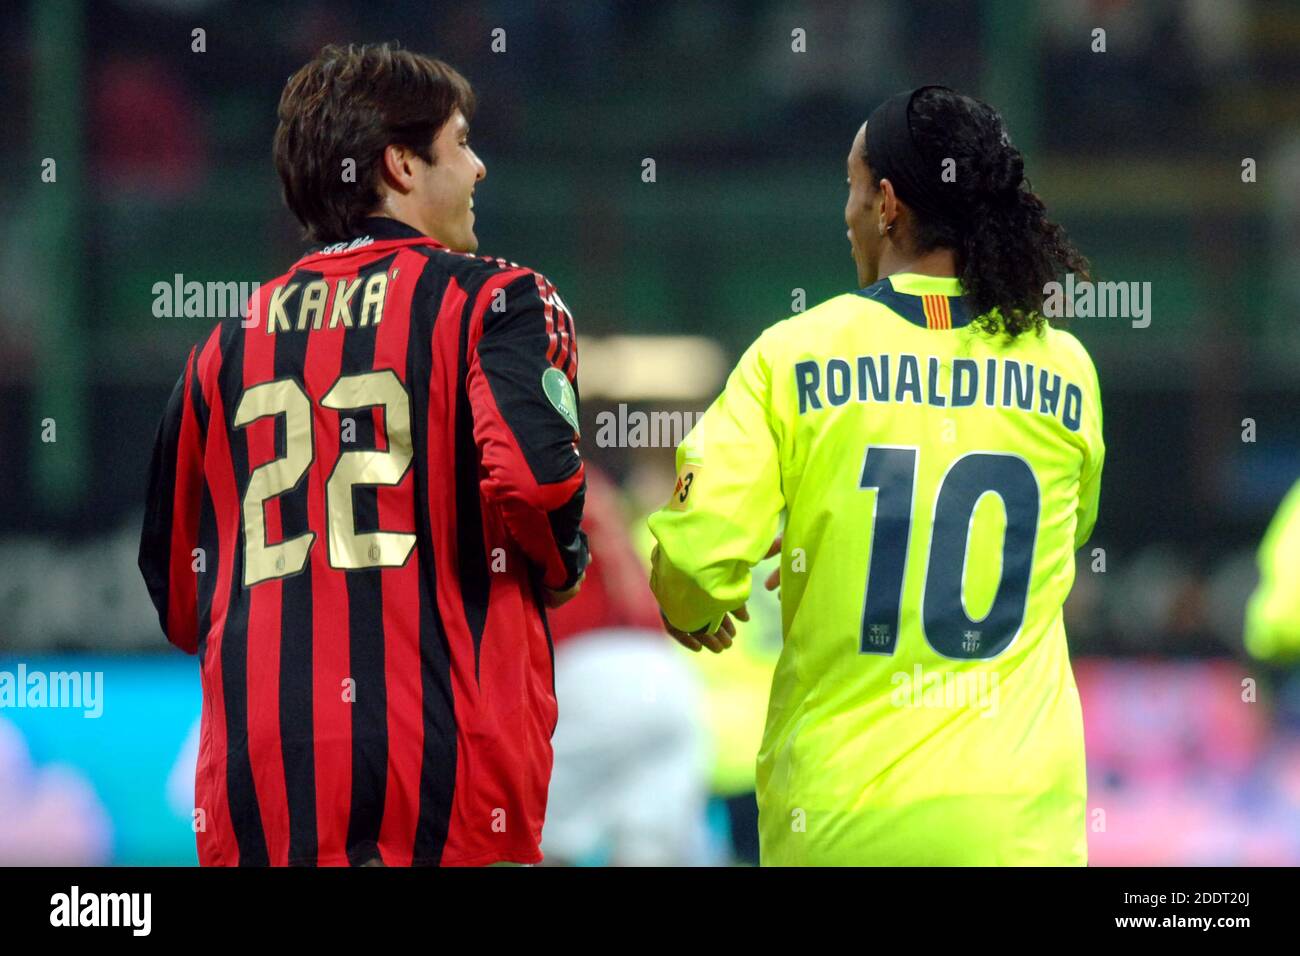 Brazilians football players Ronaldinho of FC Barcelona, and Kakà of AC  Milan, during a UEFA Champions League's match, in Milan, 2007 Stock Photo -  Alamy